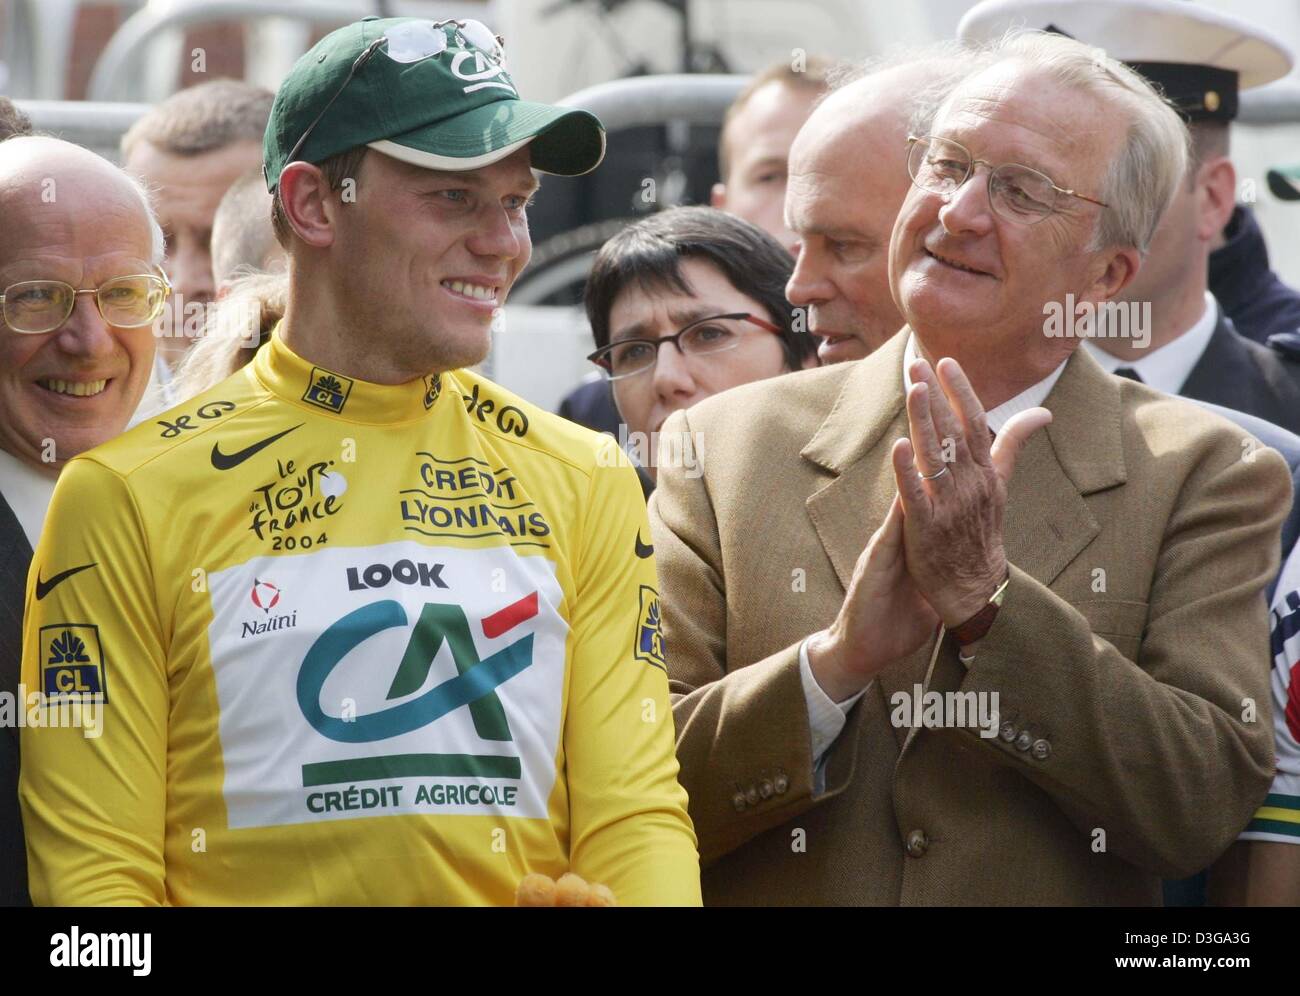 (dpa) - Norwegian cyclist Thor Hushovd of team Credit Agricole smiles after receiving the yellow jersey of the overall leader as Belgian king Albert II. applauds him after the second stage of the Tour de France in Namur, Belgium, 5 July 2004. The second and 197km long stage of the 91st Tour de France cycling race took the cyclists from Charleroi to Namur. A second place finish in t Stock Photo